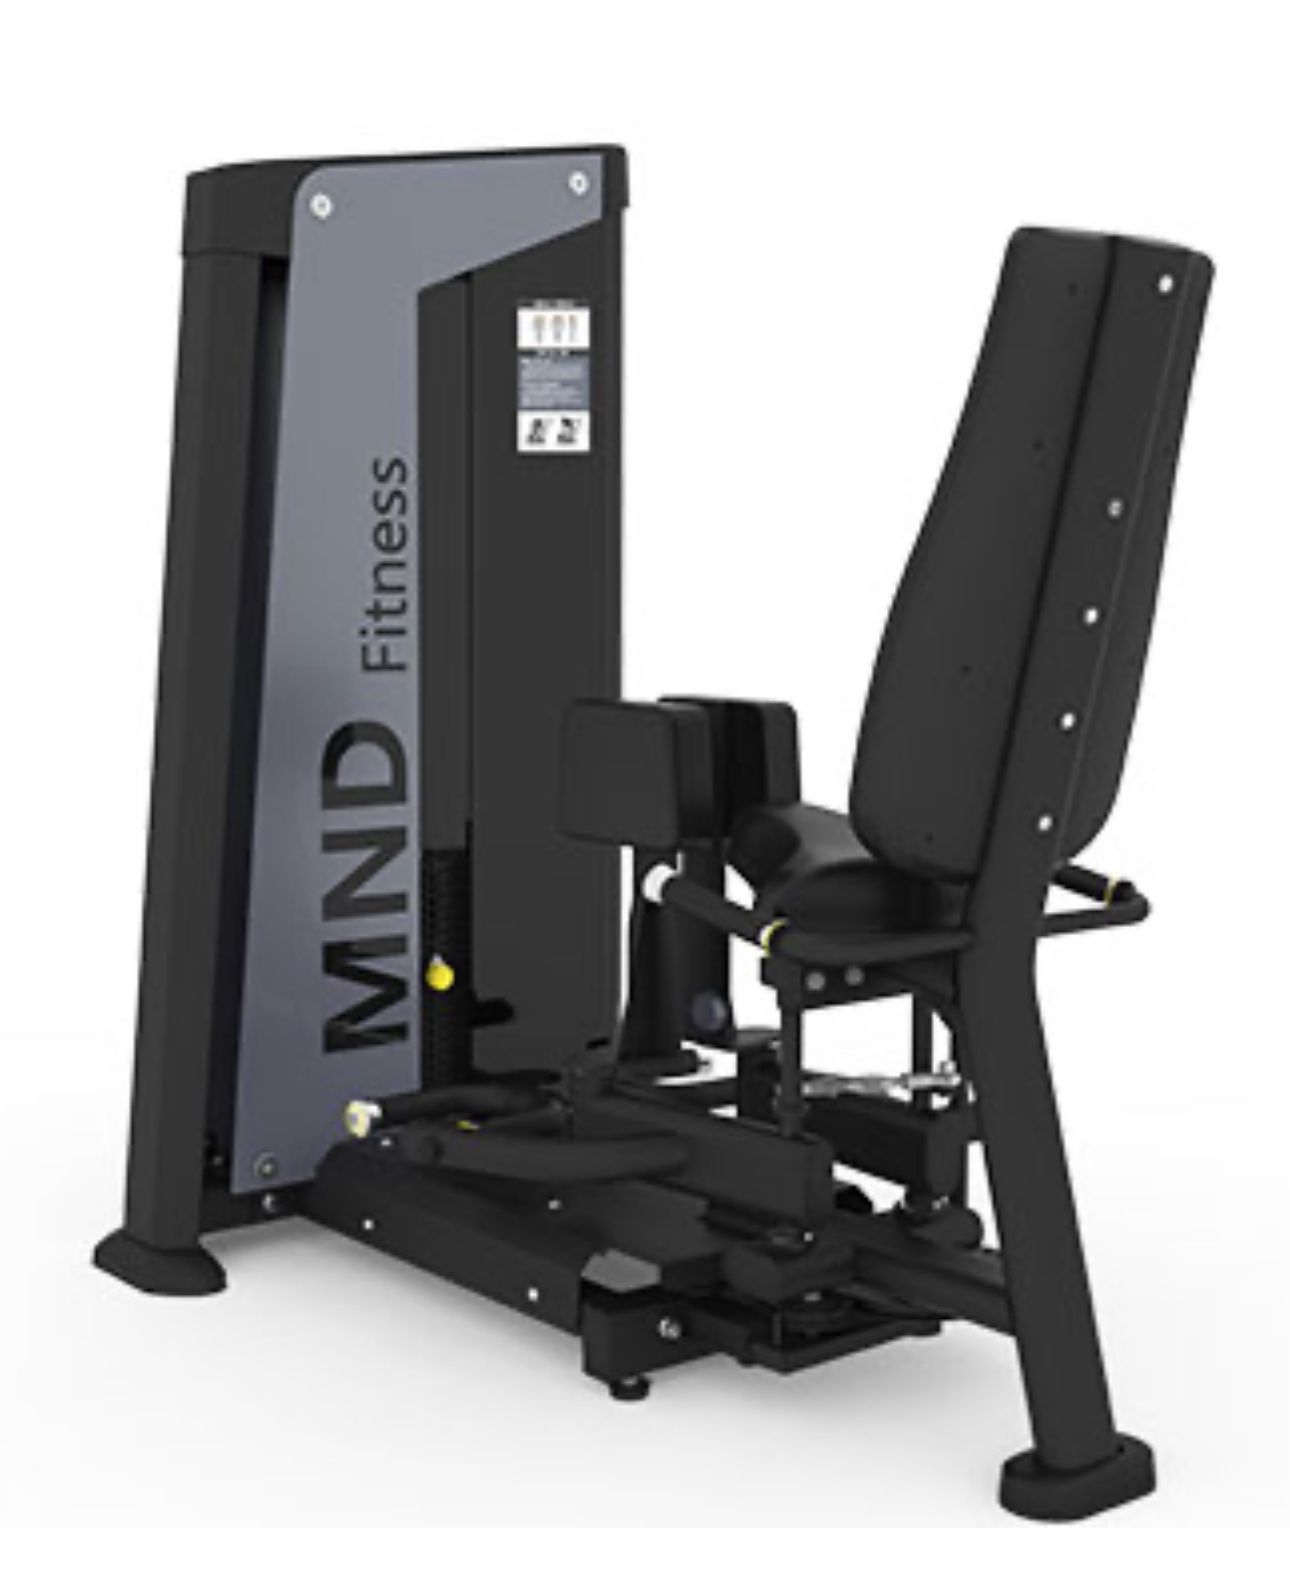 70% OFF Best Selling Functional Gym Equipment Abductor/Adductor Trainer